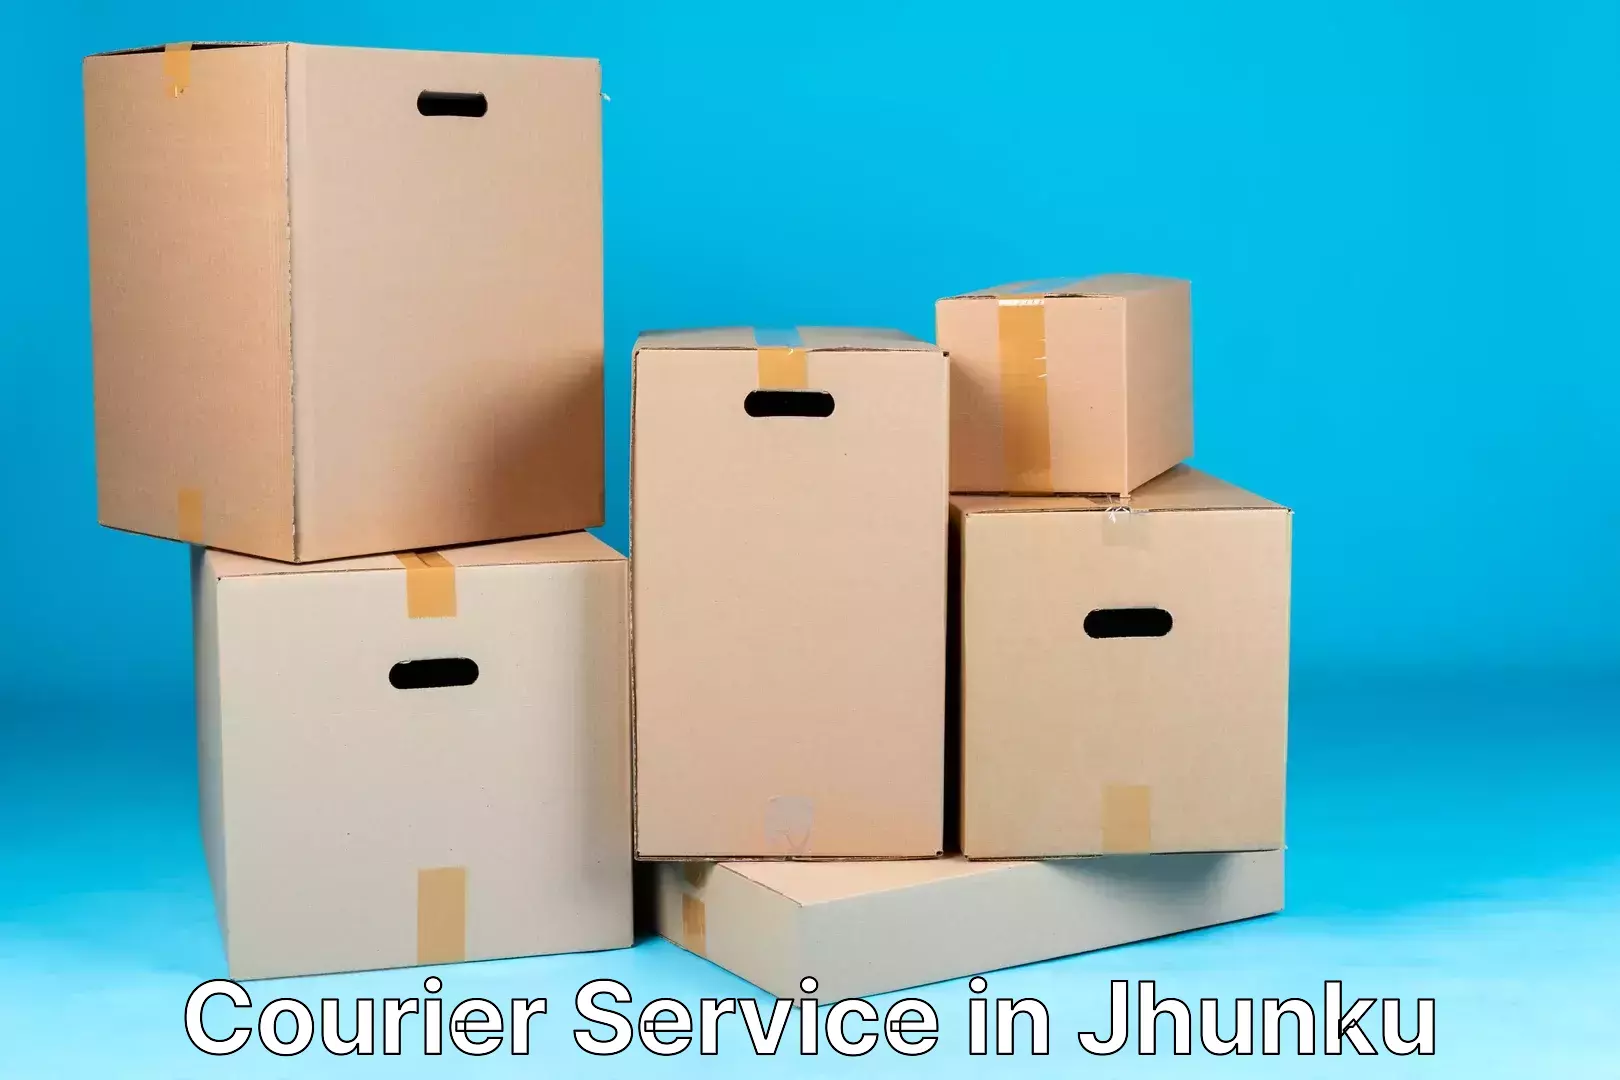 Nationwide shipping coverage in Jhunku